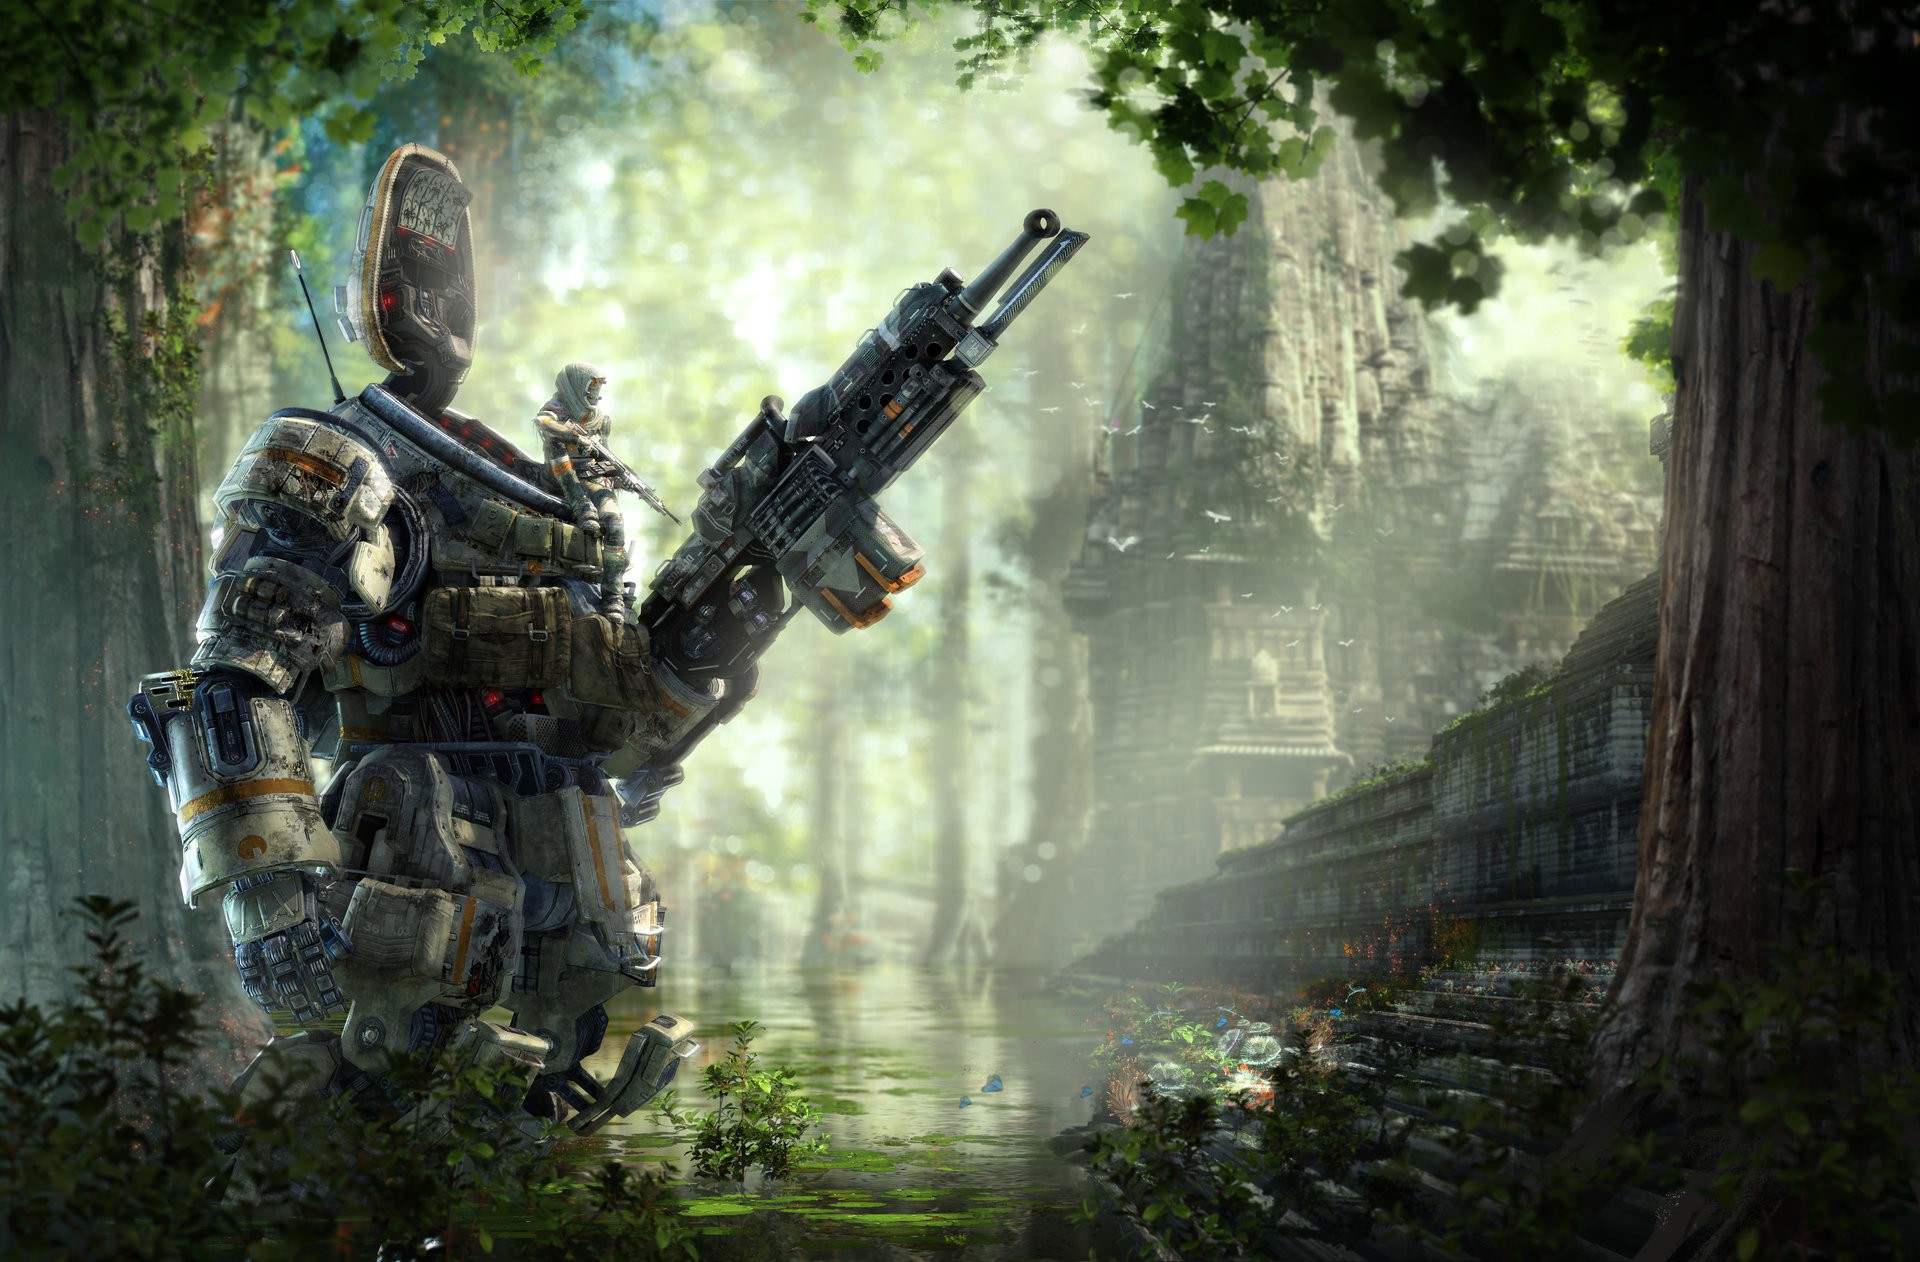 General 1920x1262 robot tropical forest Titanfall mechs temple gun weapon science fiction video games PC gaming